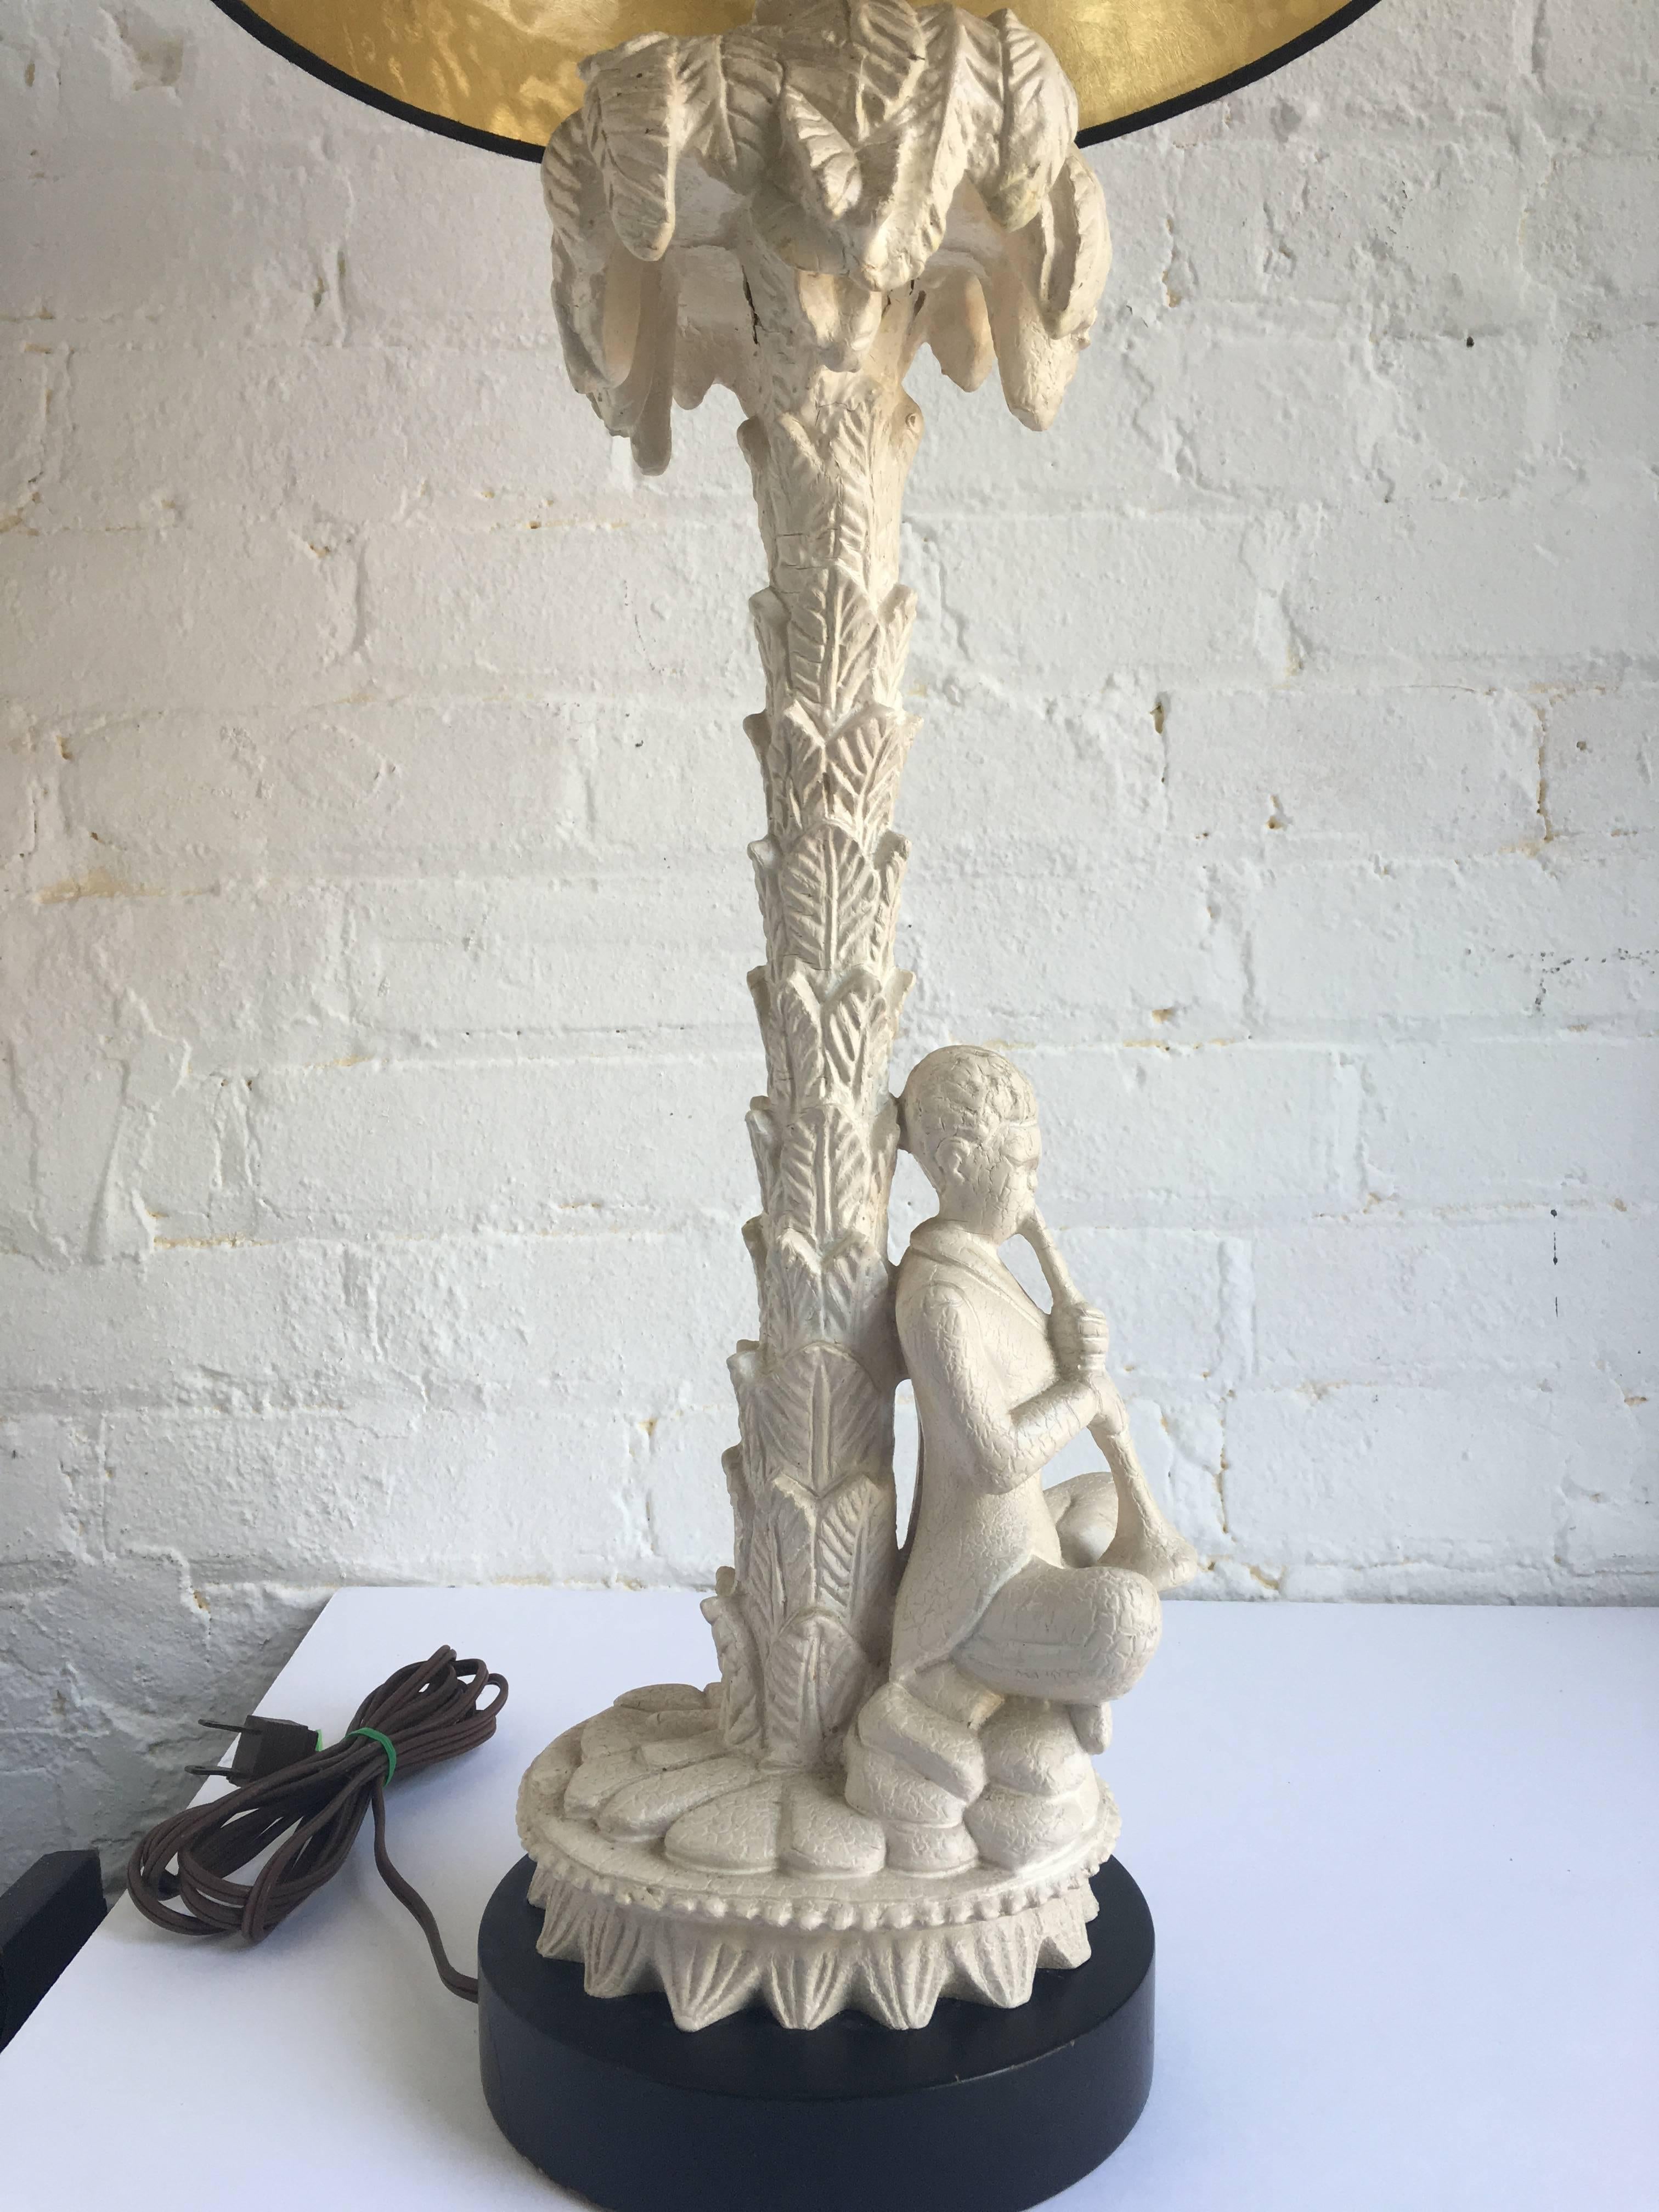 Mid-Century chinoiserie style plaster and wood palm tree lamp by Chapman. Base features detailed palm tree and musical figure in original cream painted finish. Mounted on black wood base. Original wiring in working condition. Lamp shade not